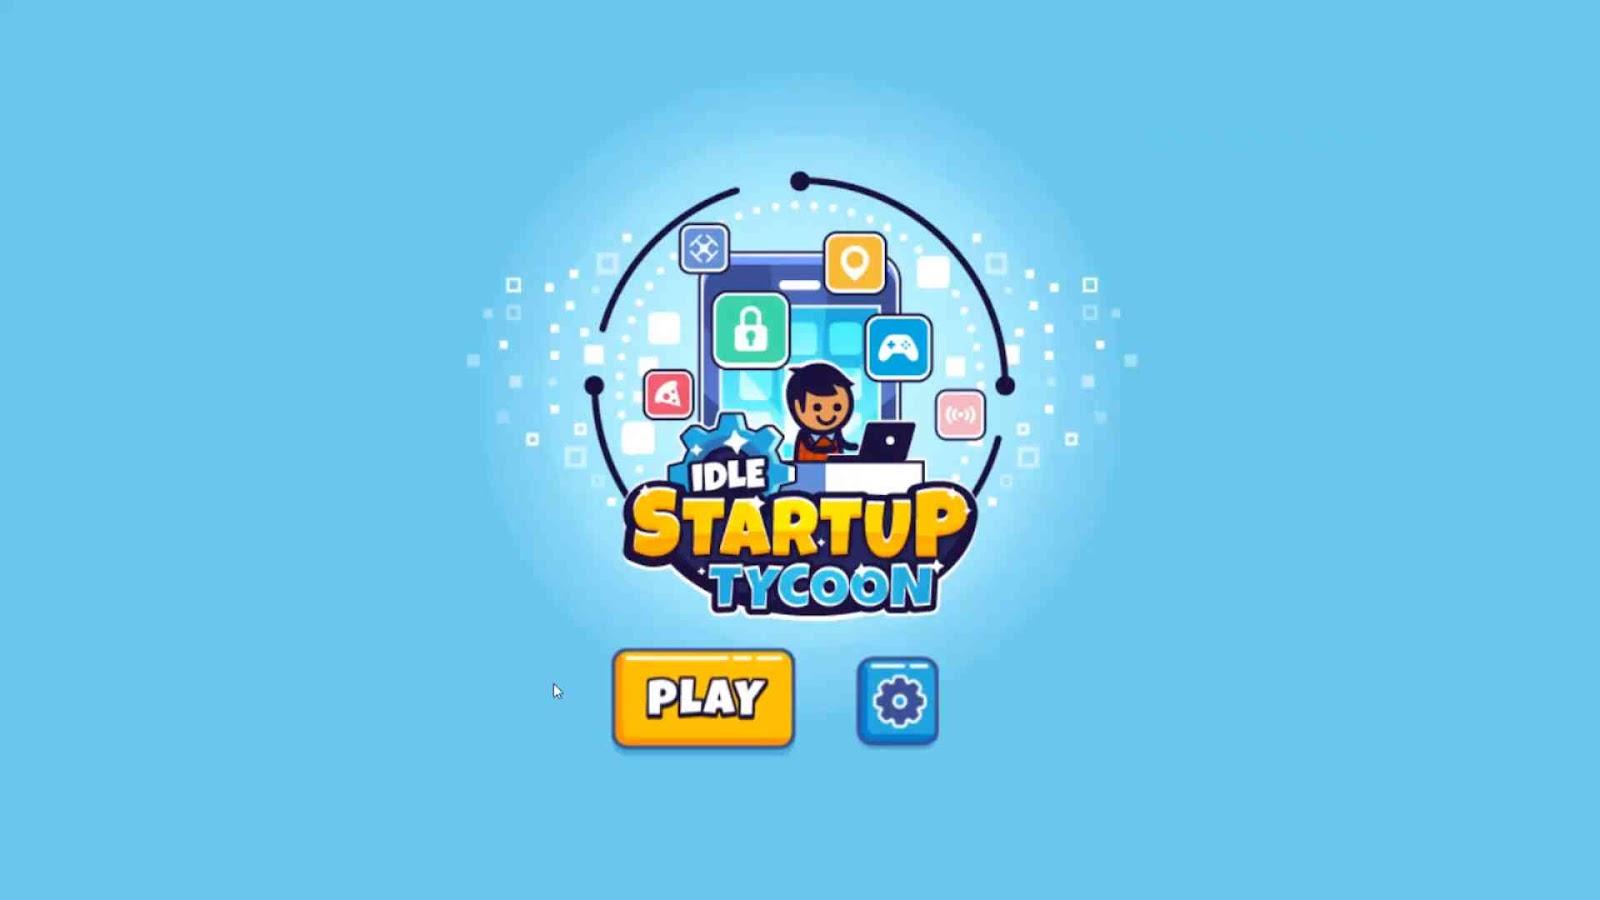  Idle Startup Tycoon